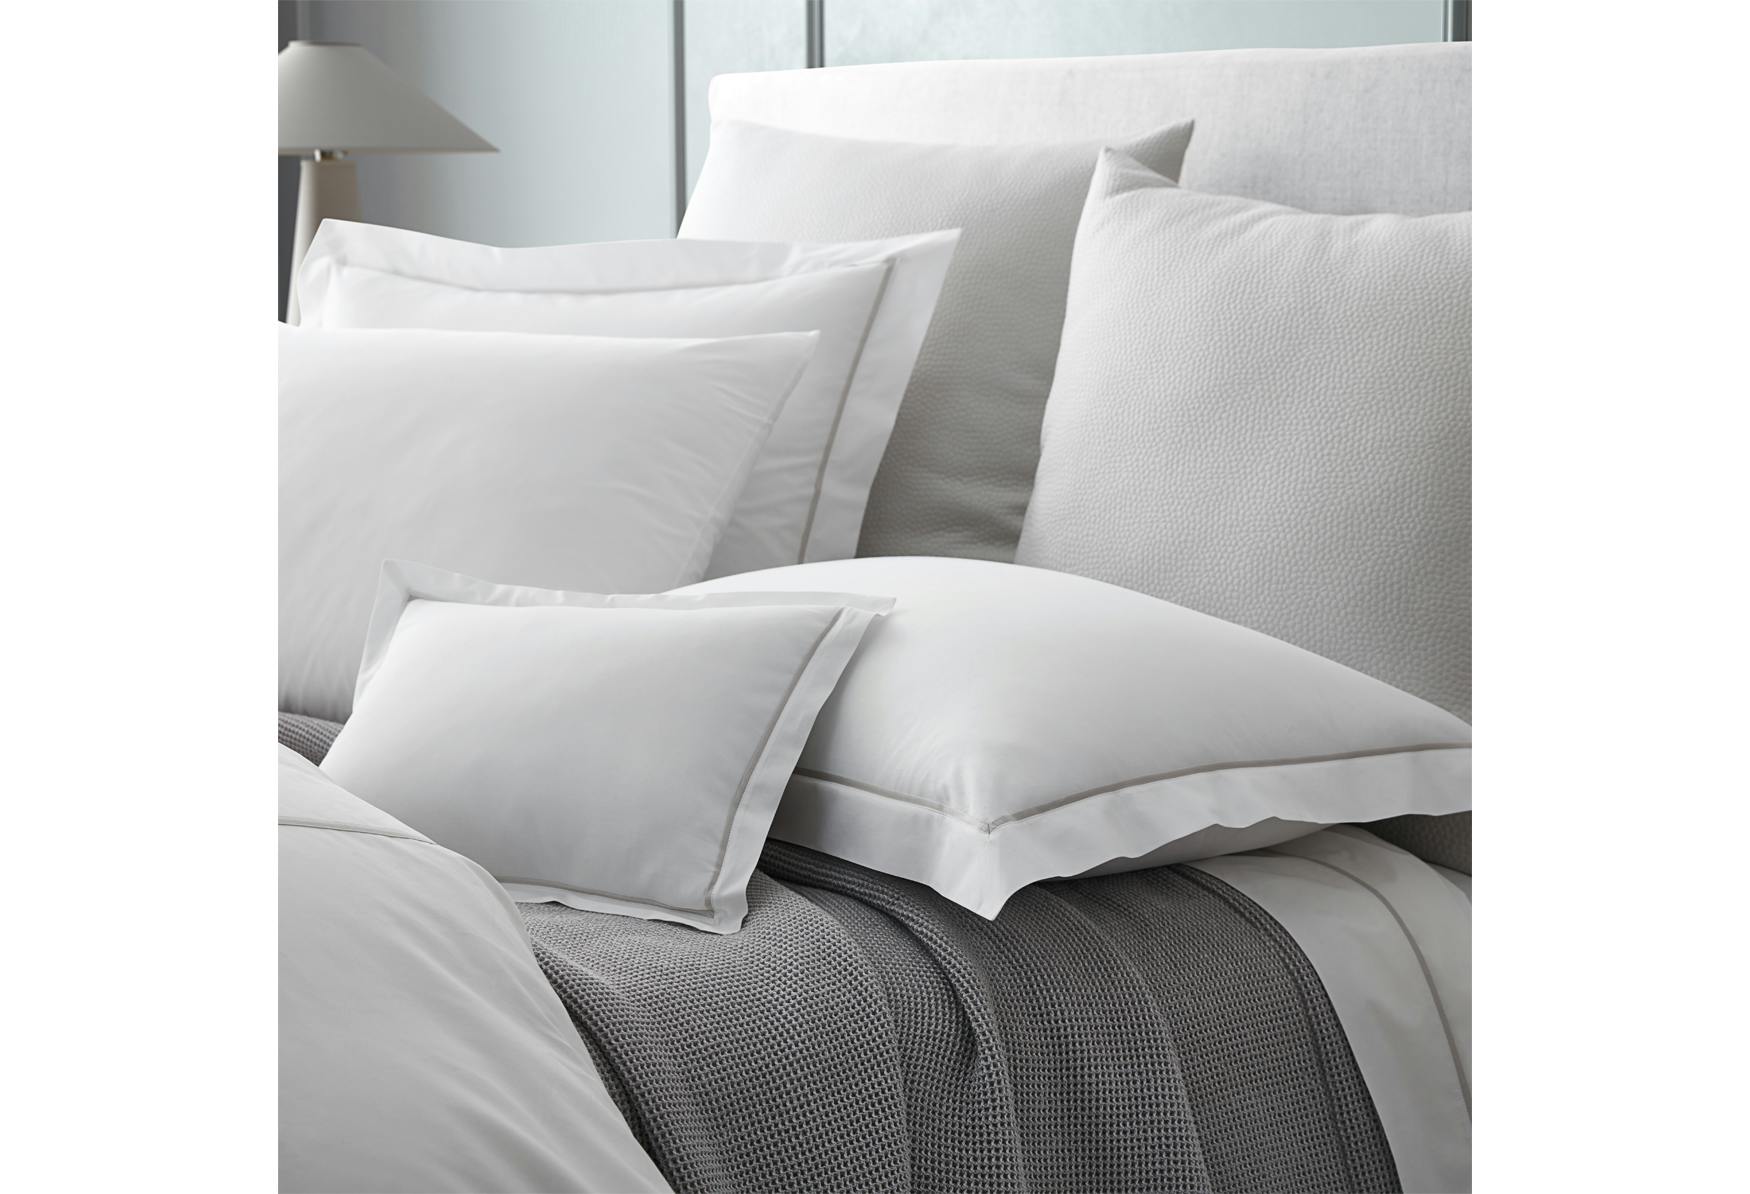 Details about   Mayfair Linen 1000 Thread Count Best Bed Sheets 100% Egyptian Cotton Sheets Set 